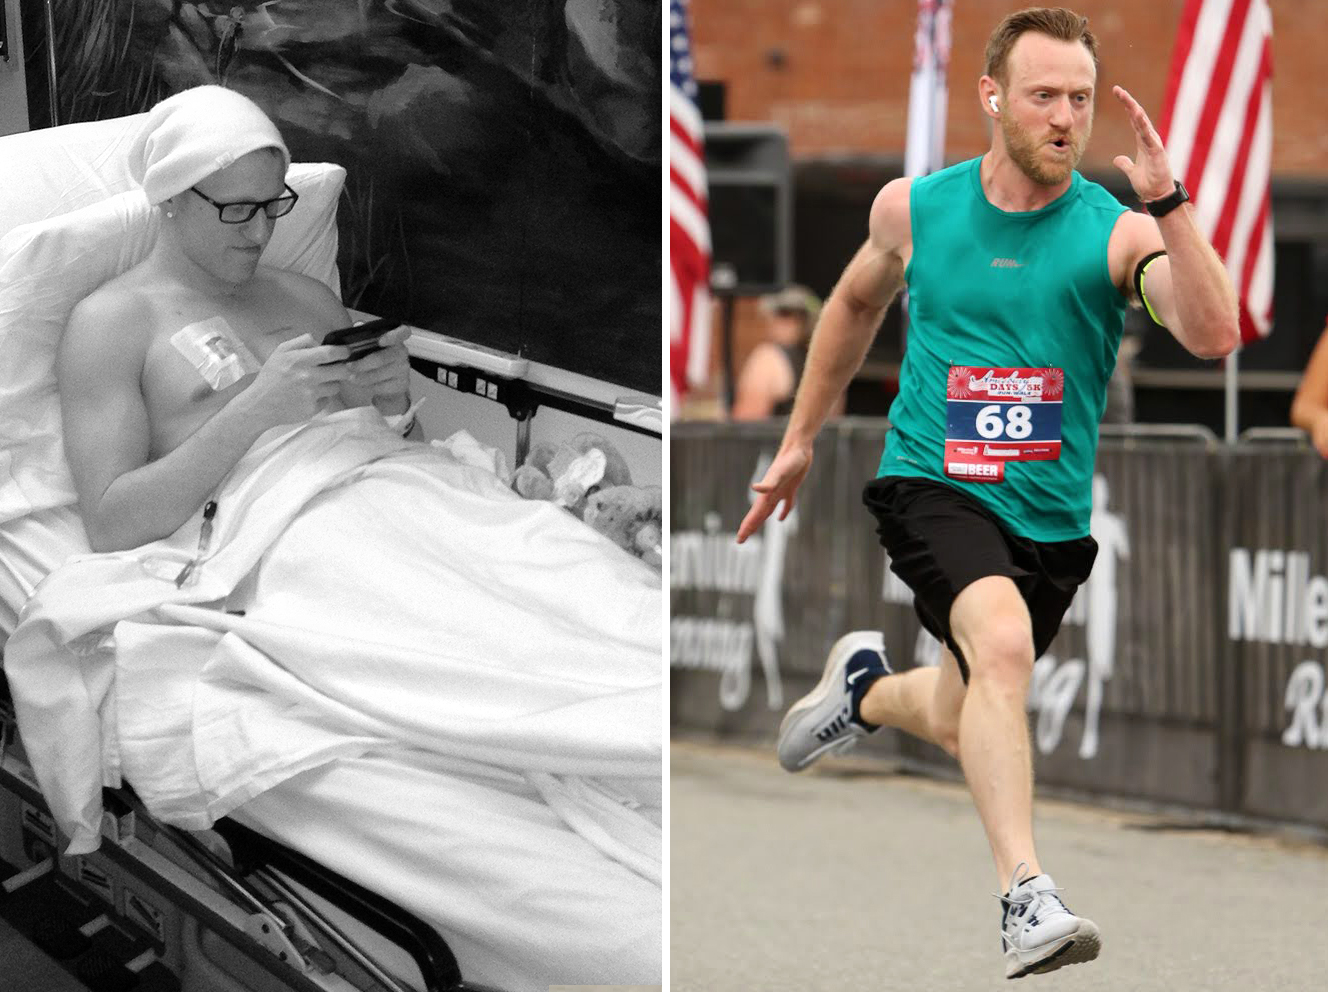 CJay DiPrima has come a long way. Ten years ago he was hooked up to an IV at MGfC, receiving chemotherapy for grey zone lymphoma. Today he is training to run his first Boston Marathon to support the hospital he credits with saving his life.